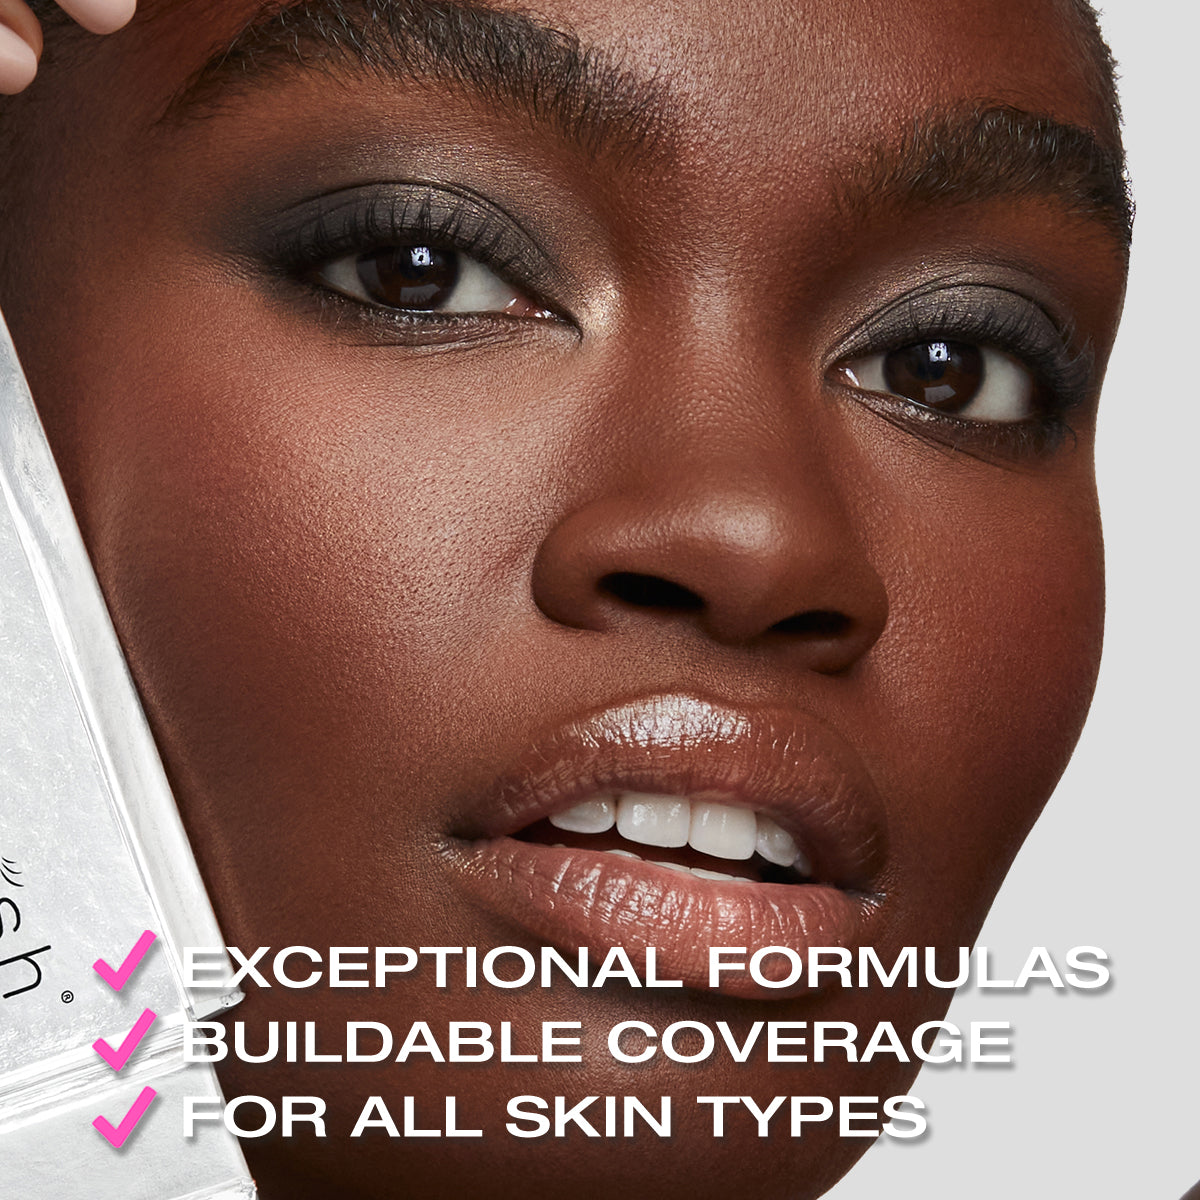 a photo of a beautiful woman with copy on top stating that the coverage in the Fold Out Face is buildable, and the formulas are exceptional & good for all skin types